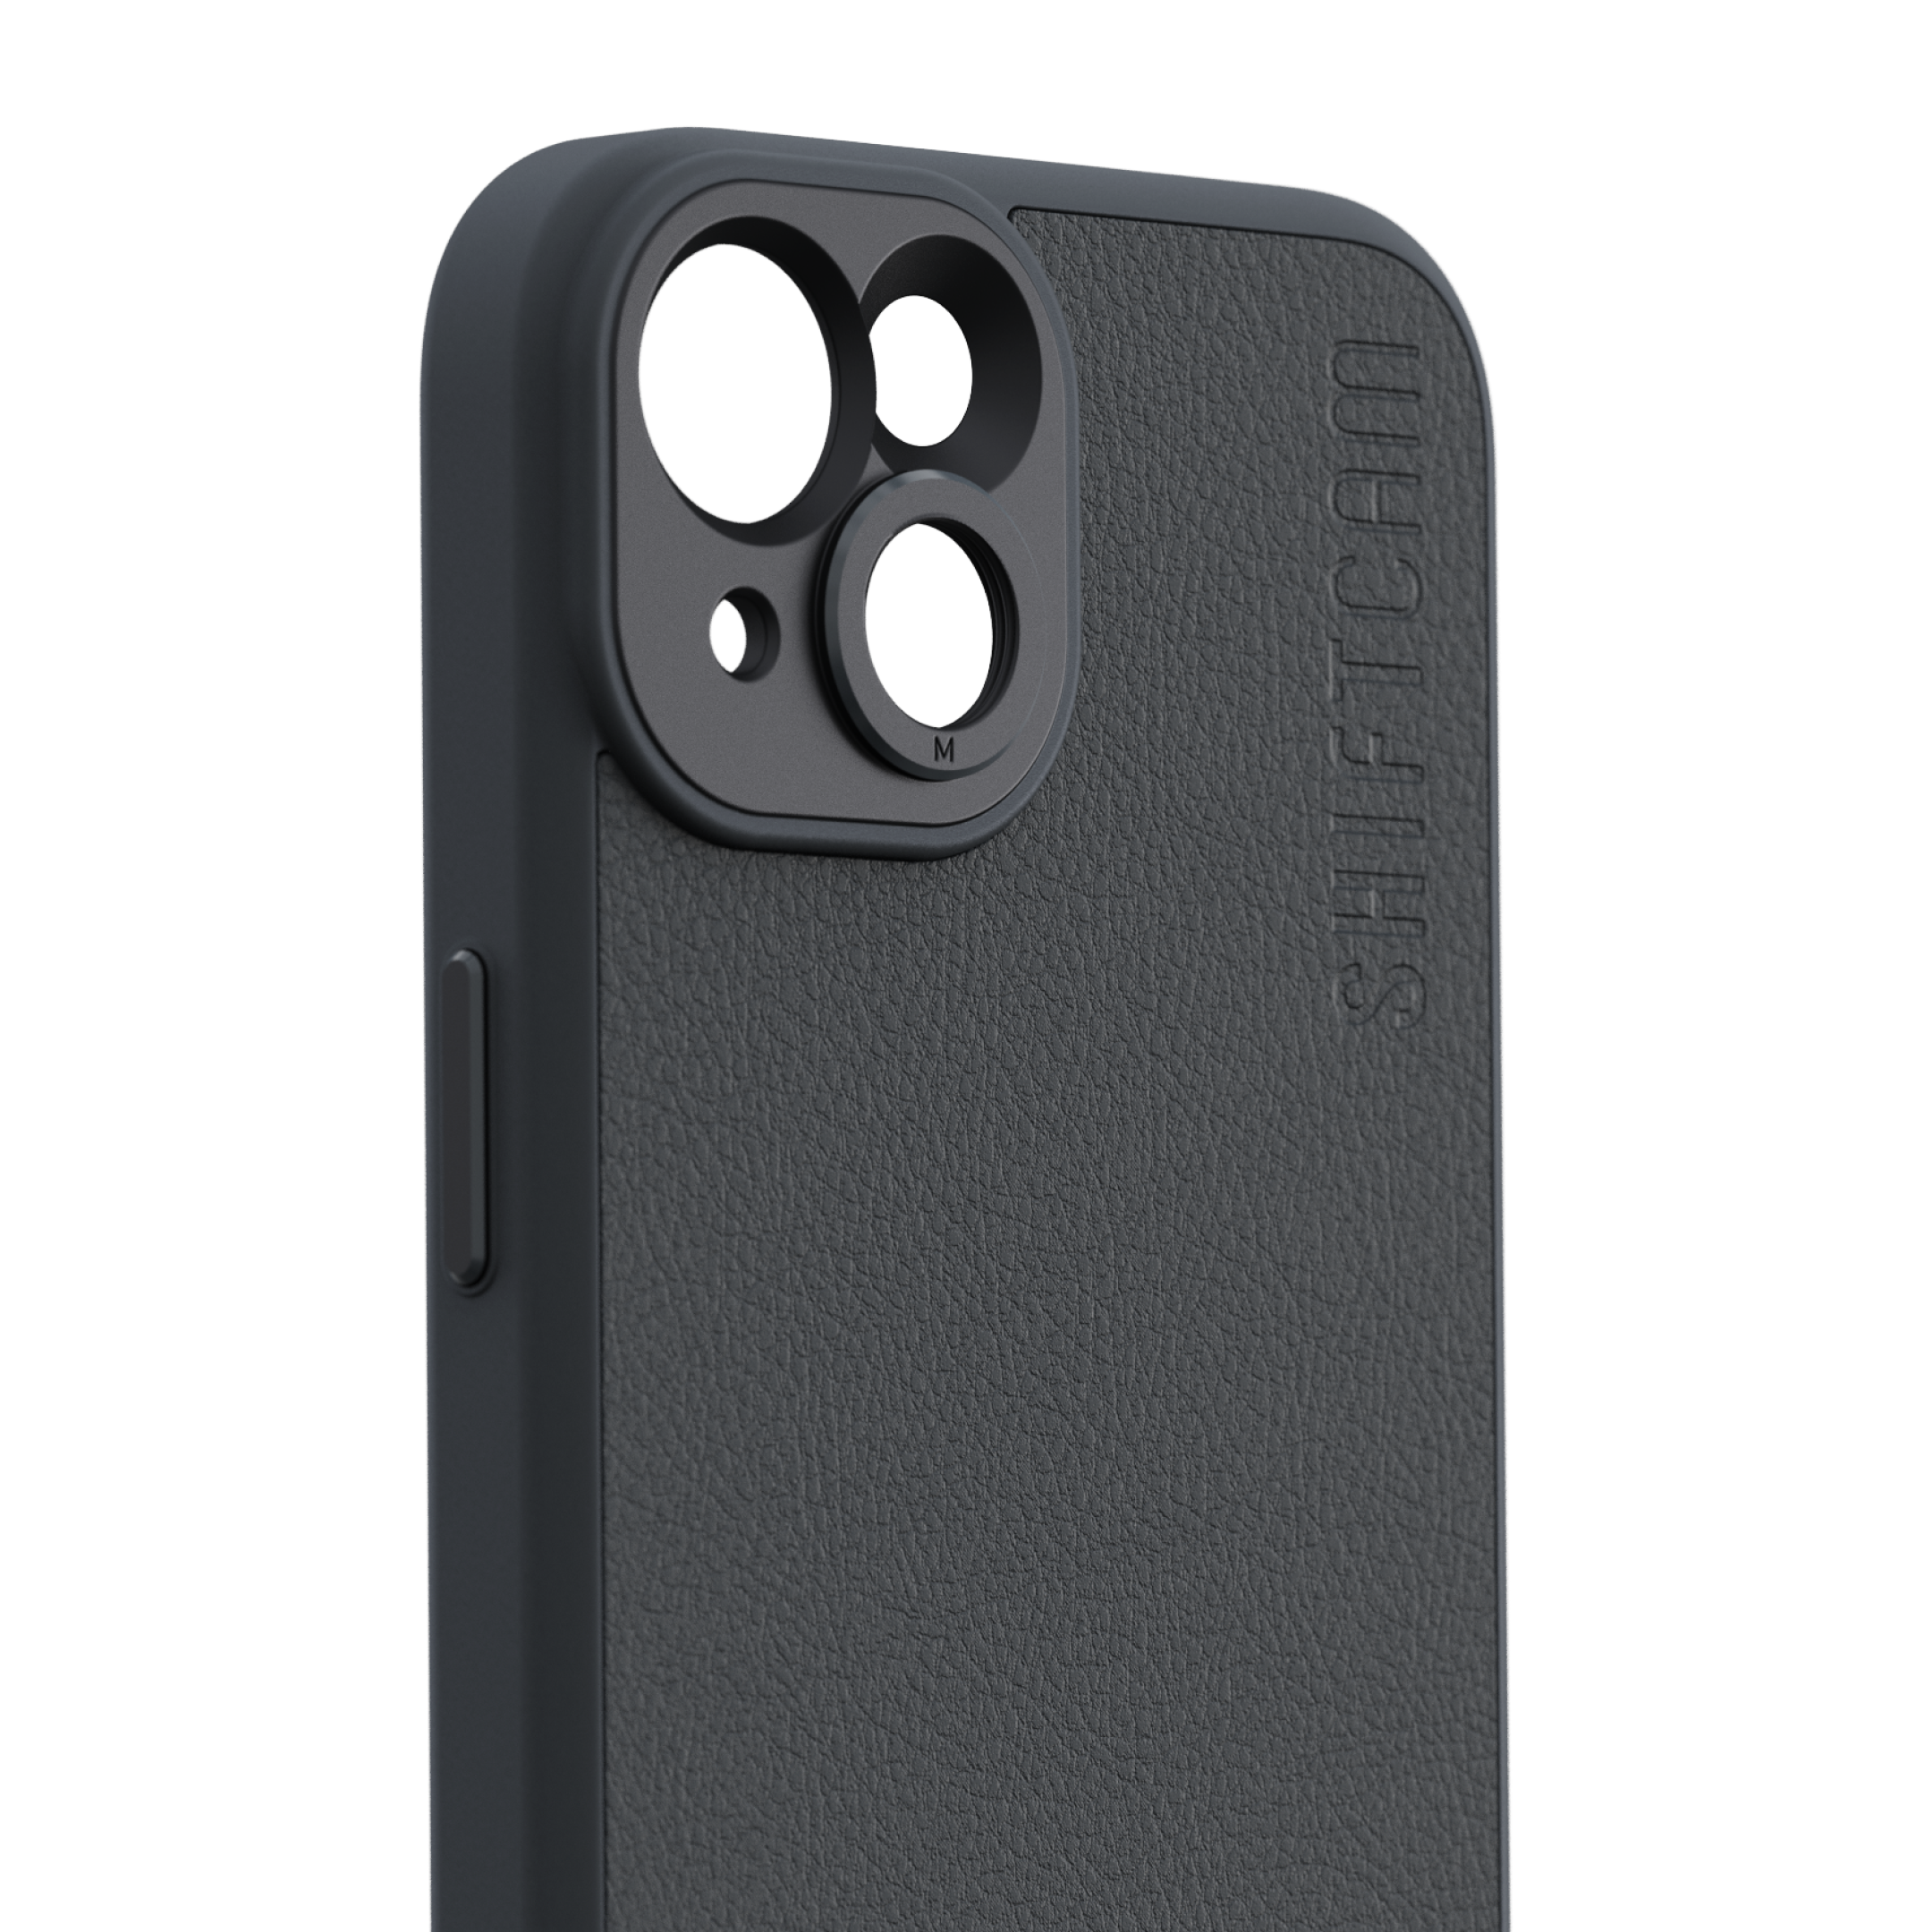 SHIFTCAM LensUltra Case mit Apple, Plus, Backcover, Charcoal iPhone Objektivhalterung, 14